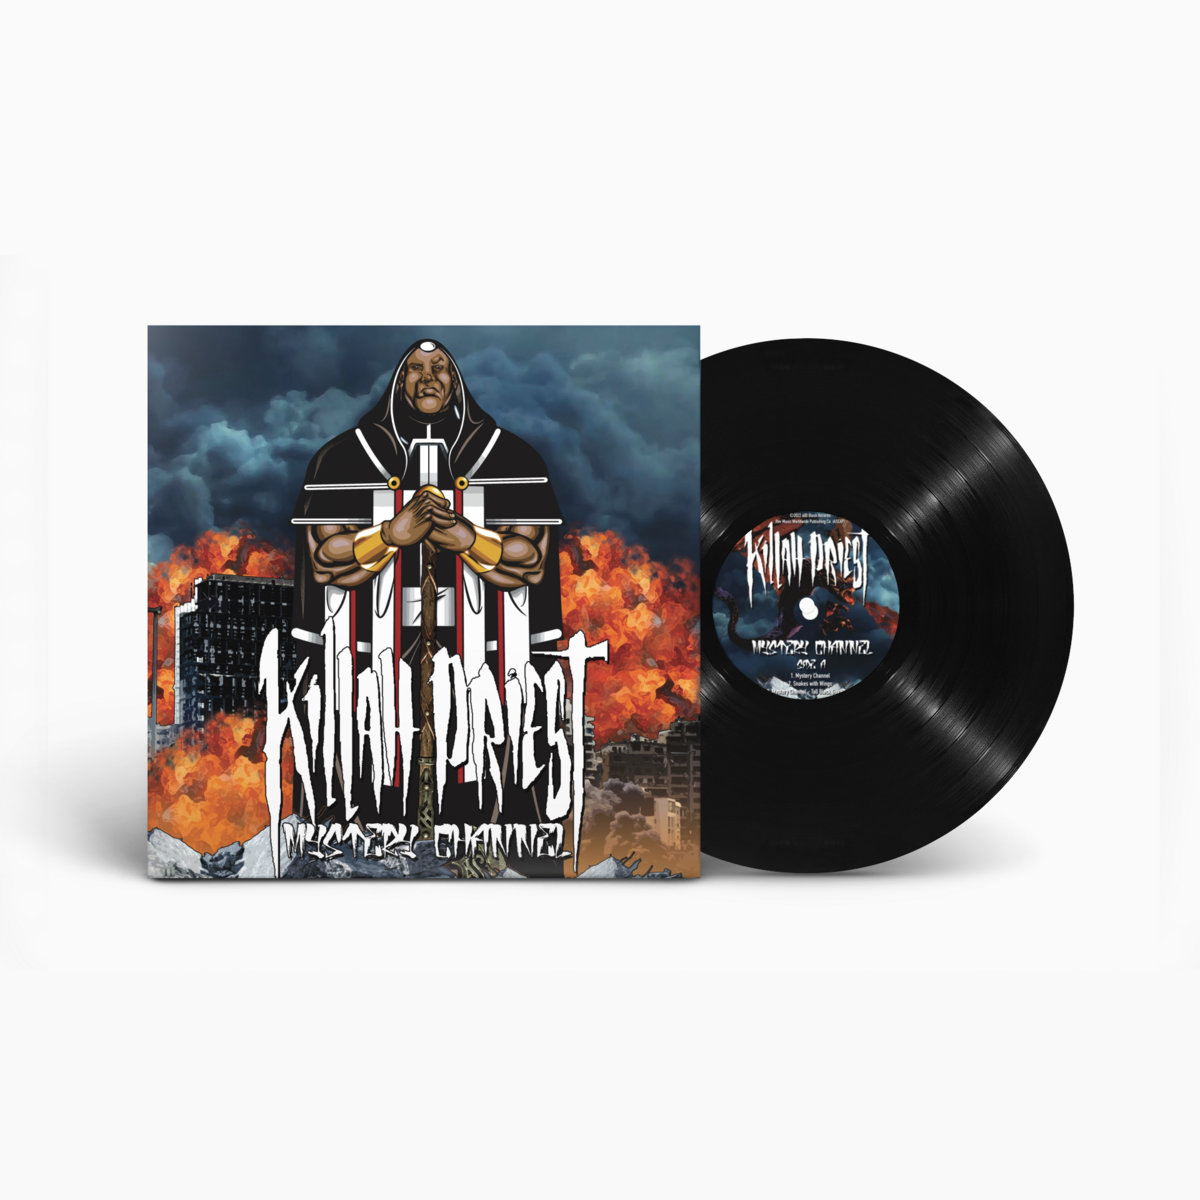 Killah Priest - Mystery Channel: Limited Edition Vinyl EP